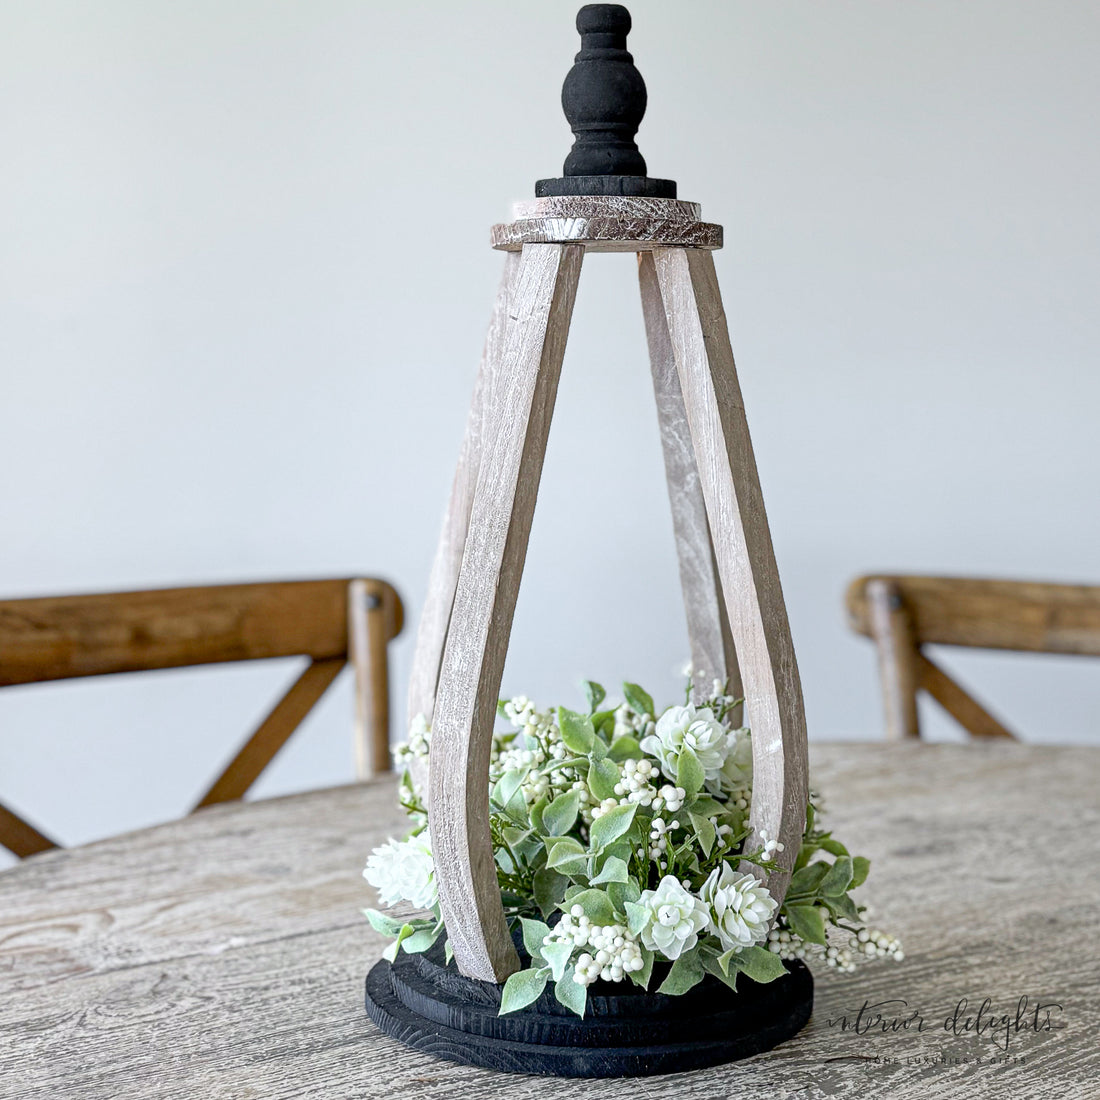 Spindle Top Wooden Lantern